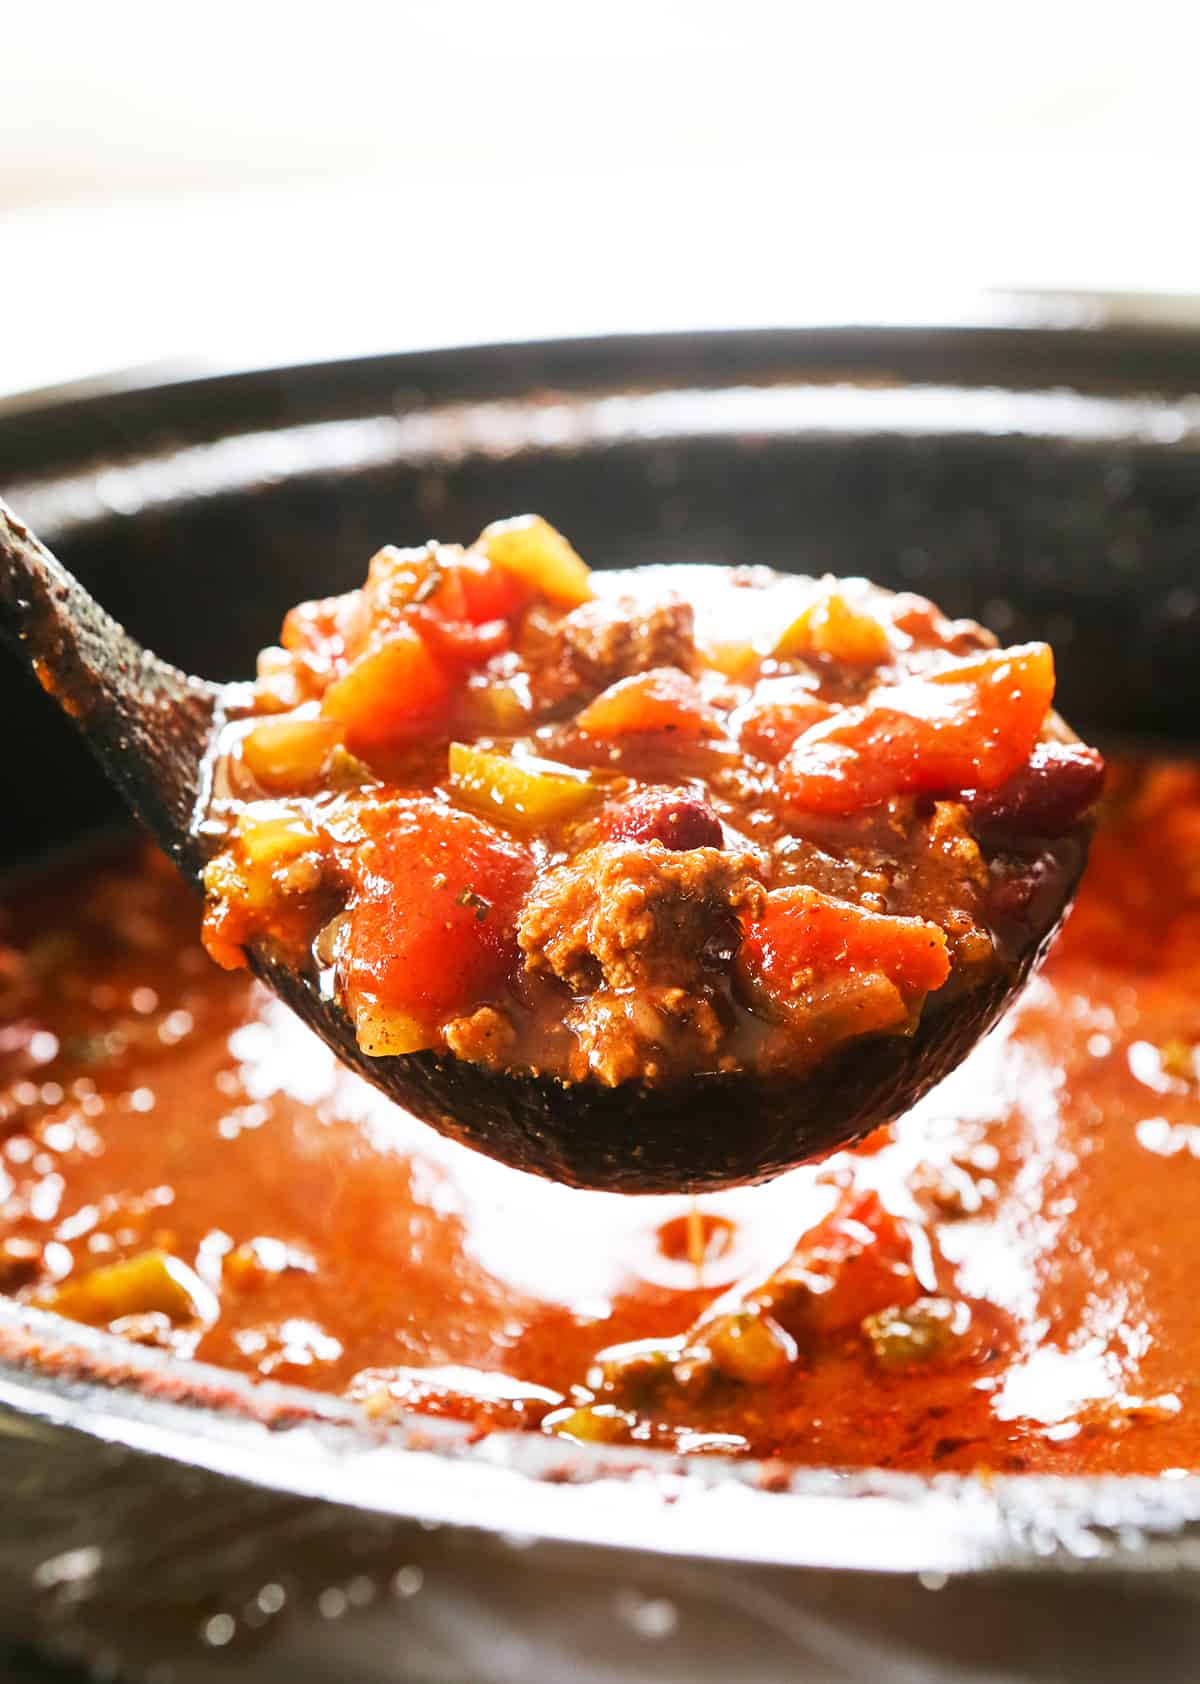 Ladle filled with chunky chili hovering over a full crockpot.